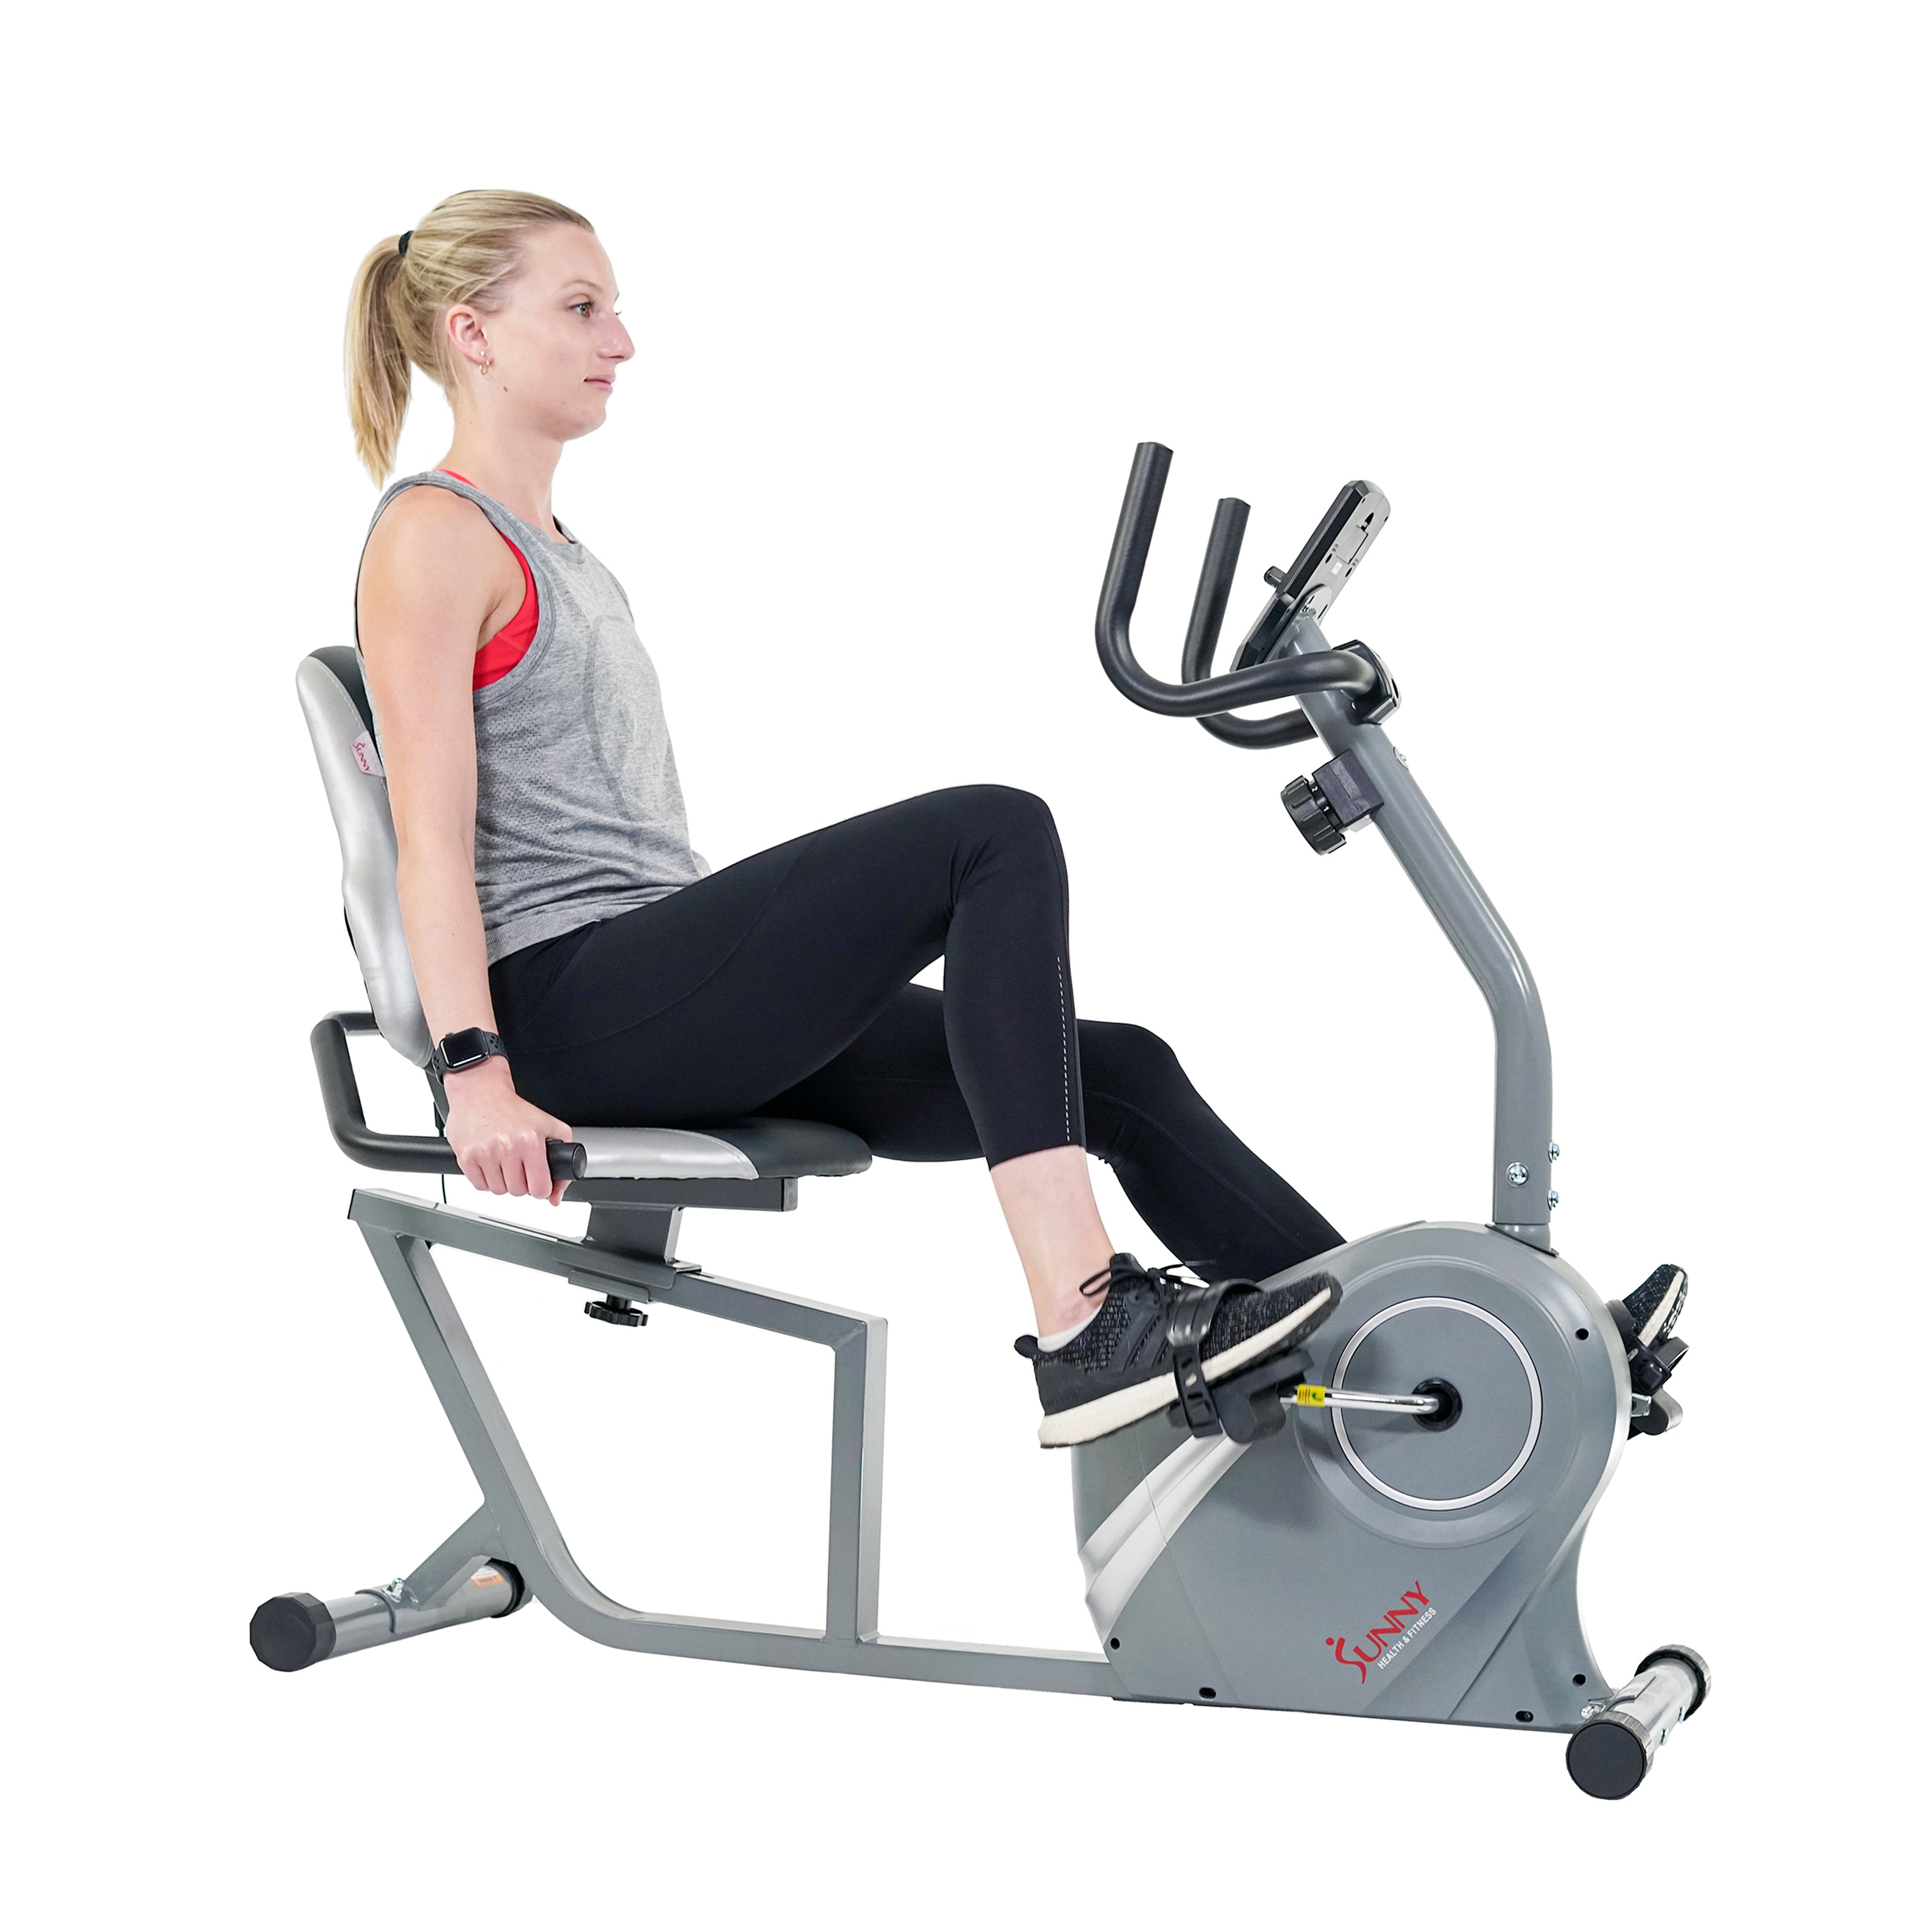 Sunny Health & Fitness Magnetic Recumbent Exercise Bike for Indoor Cardio Training w/ Adjustable Soft Seat Cushion, SF-RB4876 - image 8 of 8